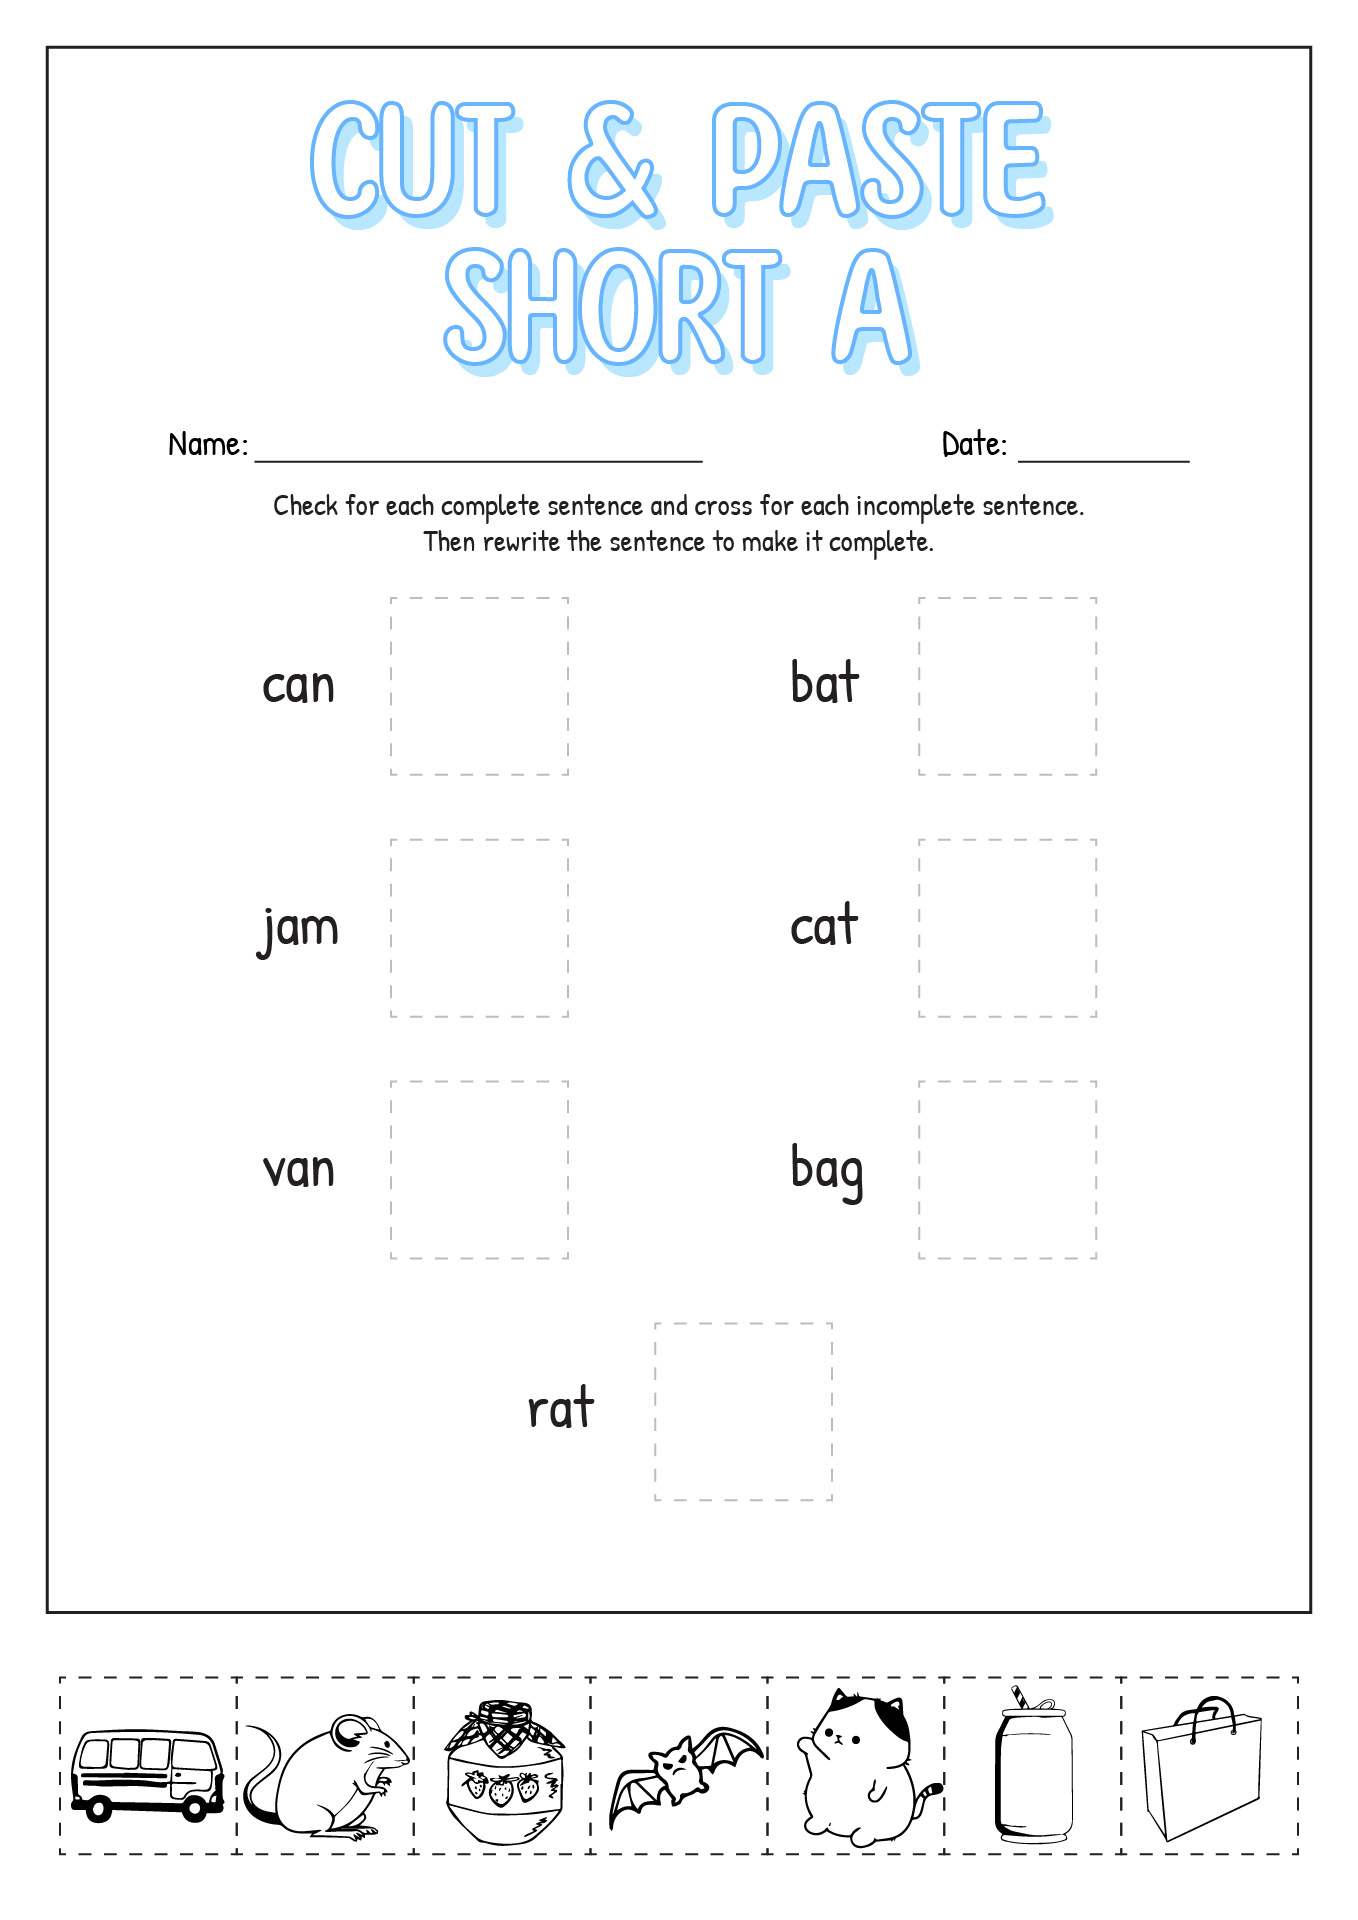 Cut and Paste Short a Worksheets